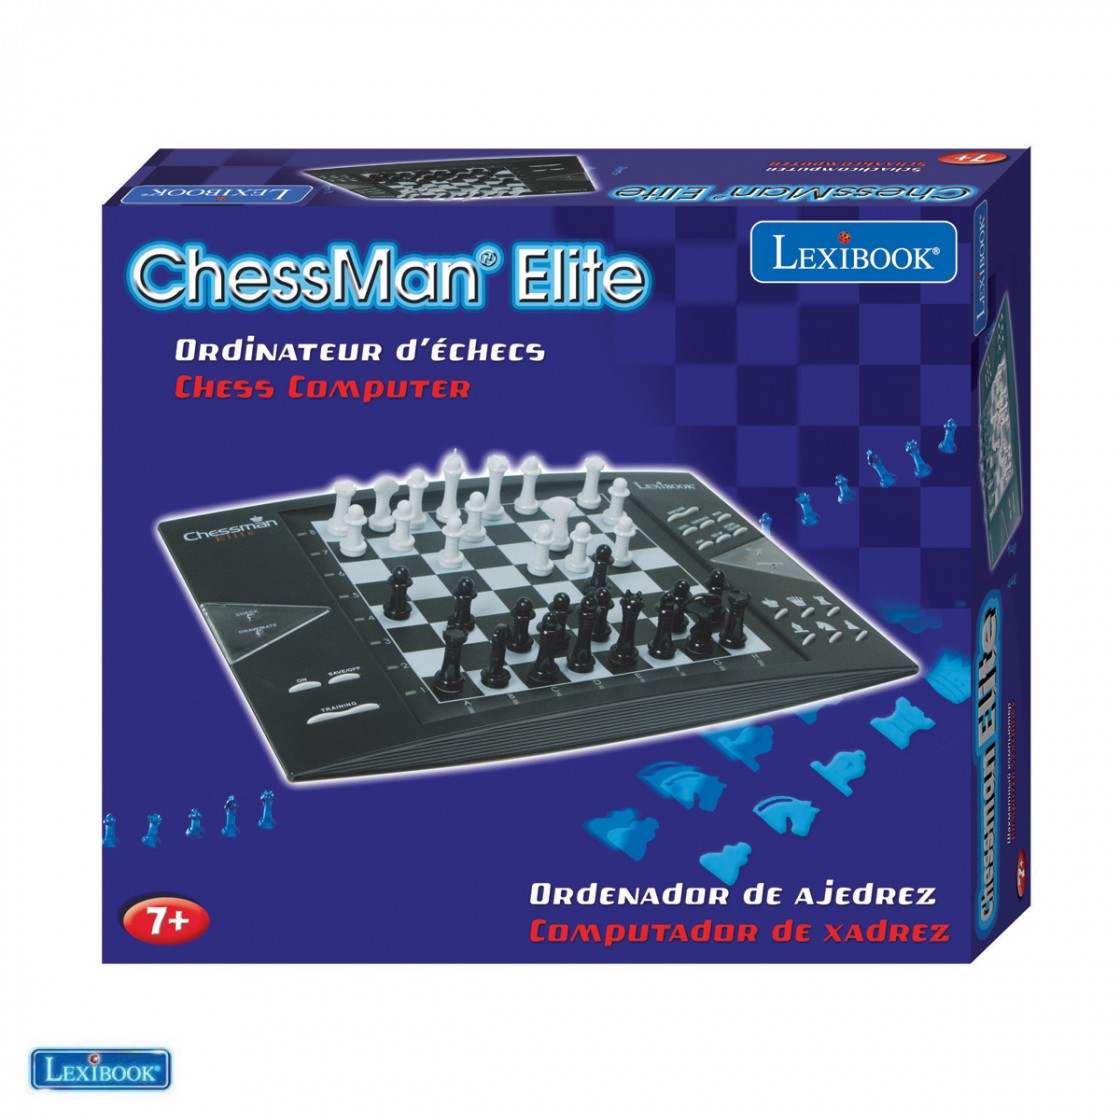 ChessMan Elite Interactive Electronic Chess 64 Levels of Difficulty 